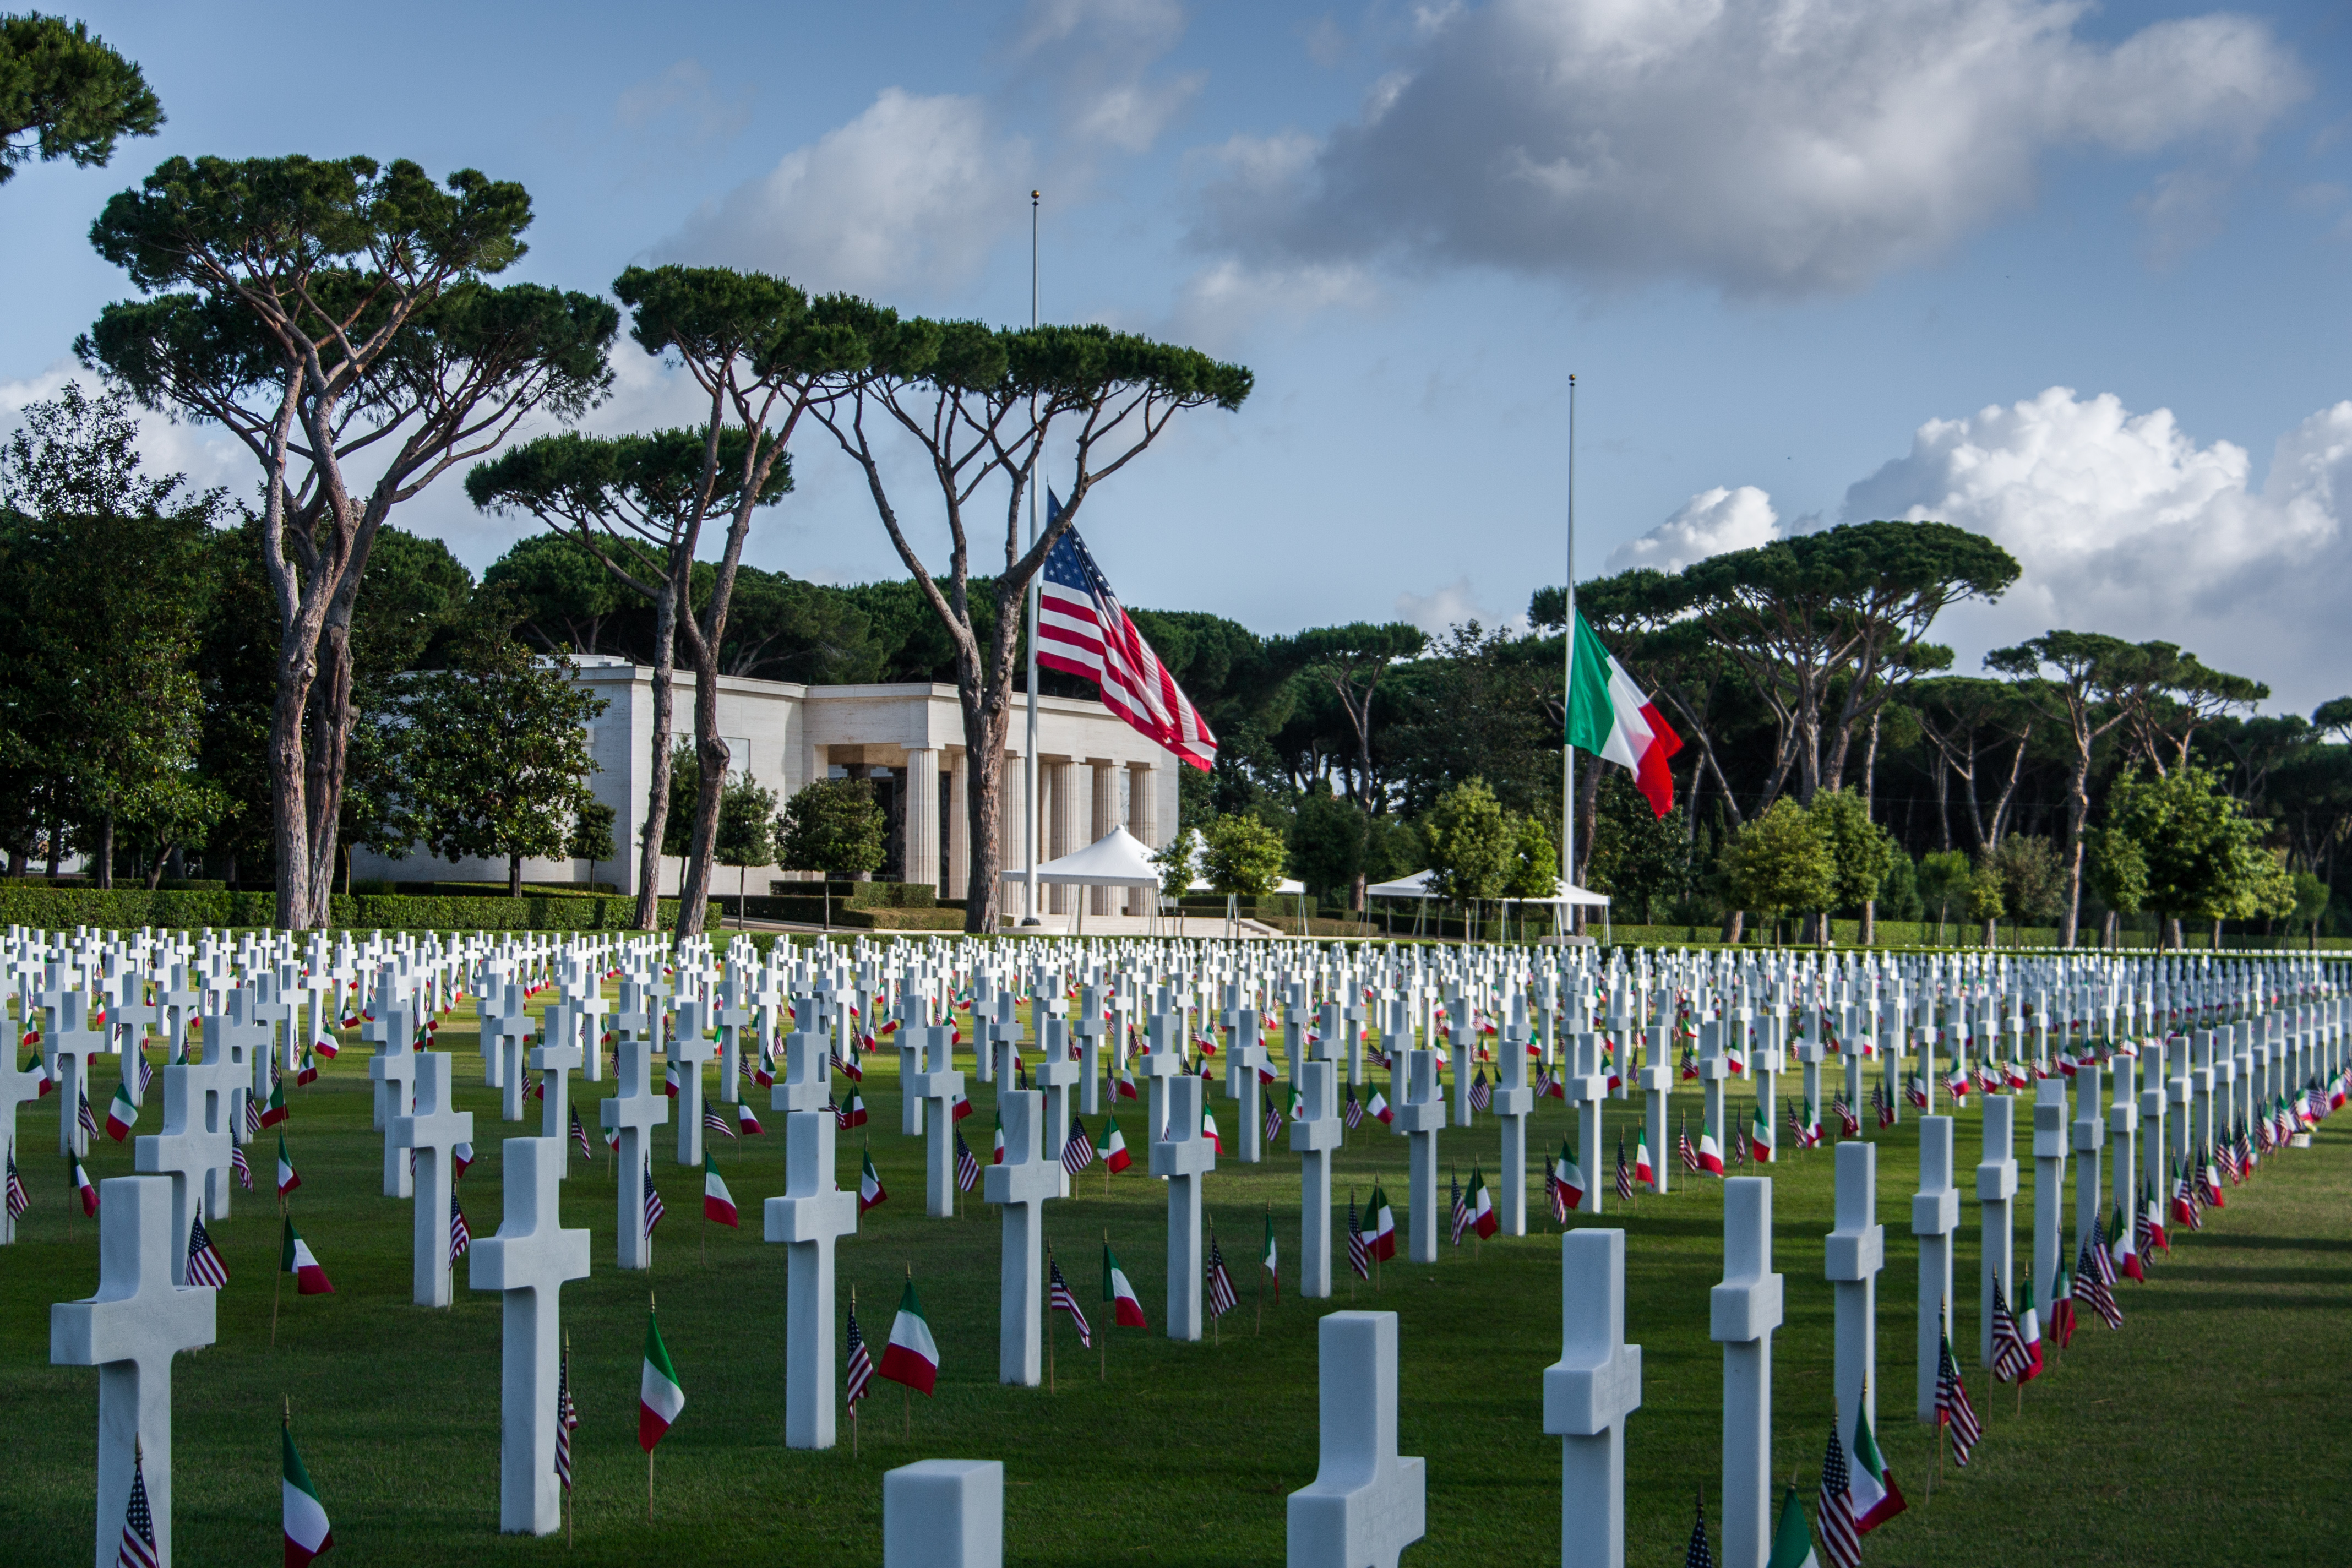 Rows of headstones with American and Italian flags cover the landscape in front of the memorial building.